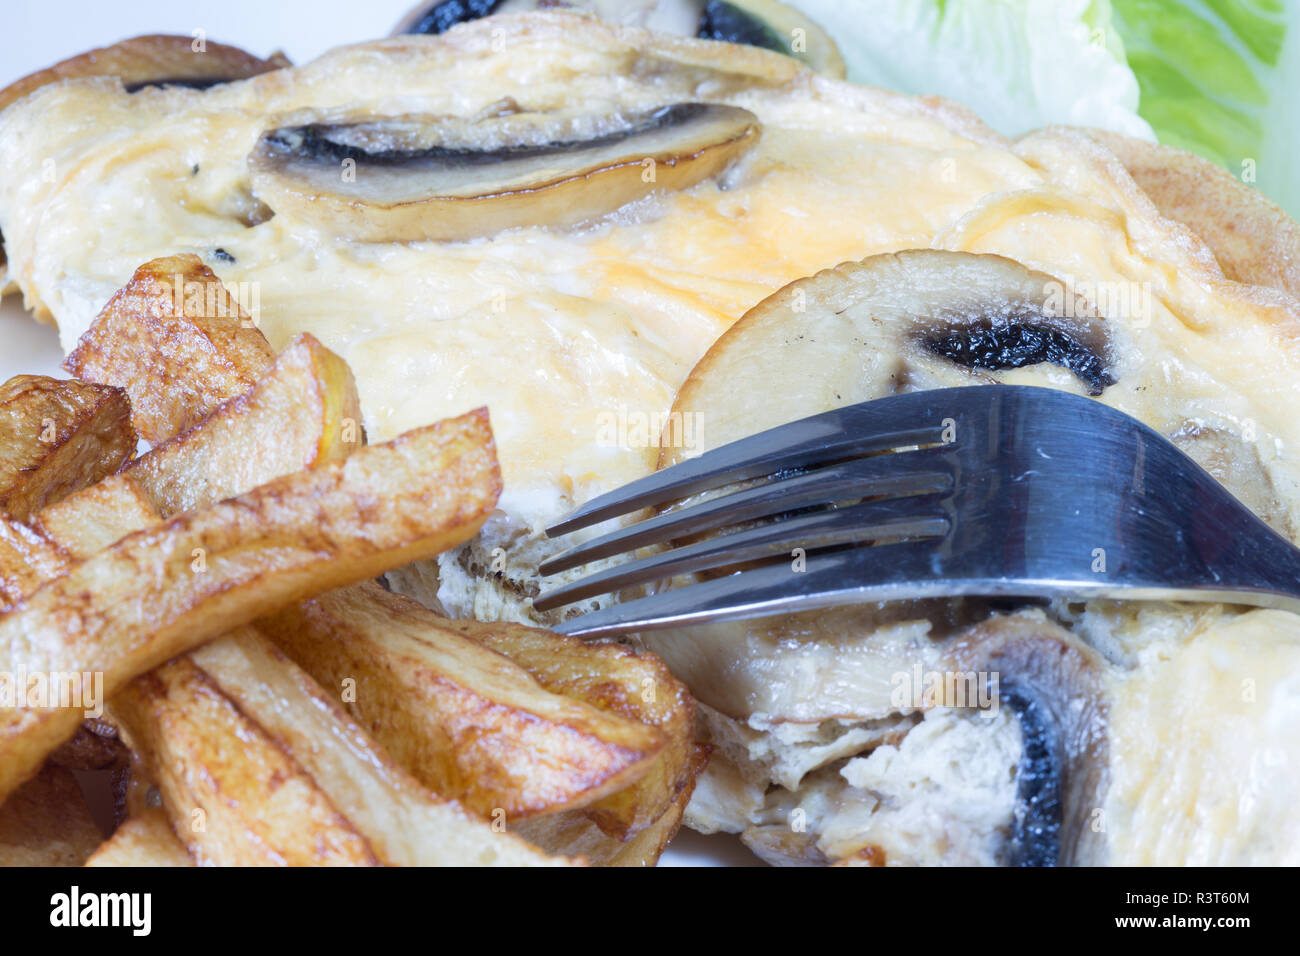 A plated meal of Mushroom omelette with chips/fries Stock Photo